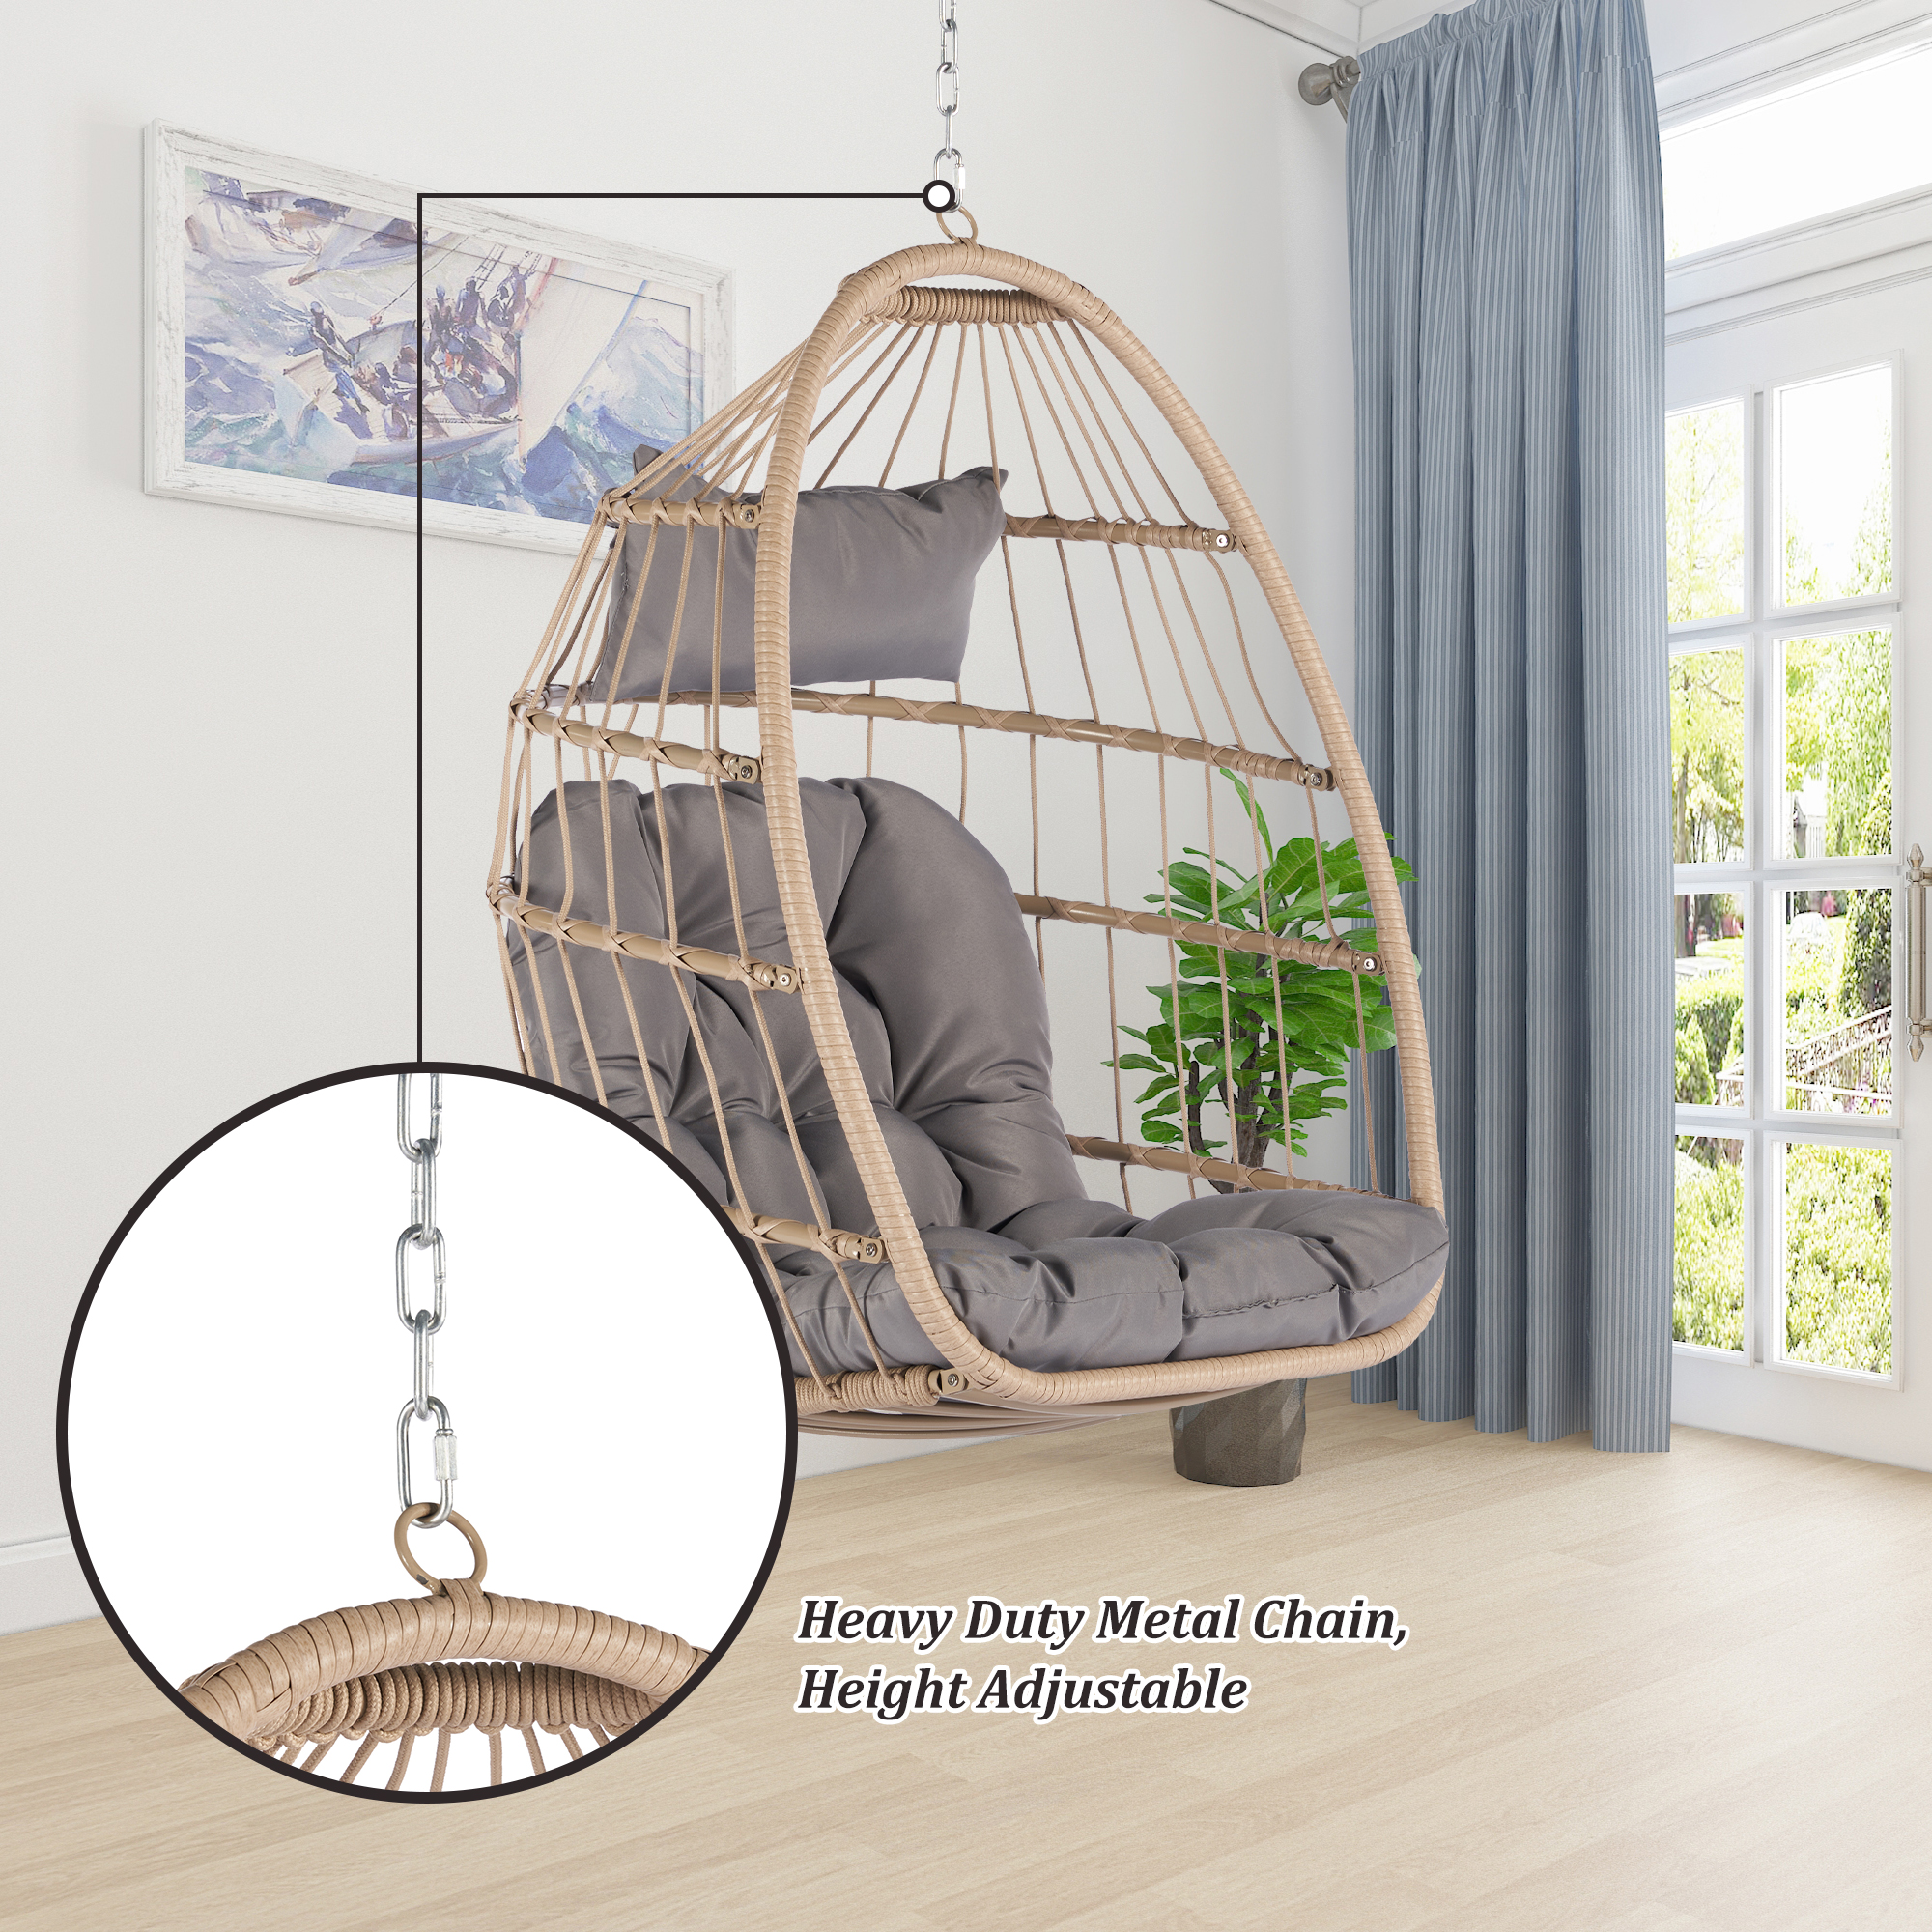 Patio Wicker Hanging Chair, Egg Chair Hammock Chair with UV Resistant Cushion and Pillow for Indoor Outdoor, Patio Backyard Balcony Lounge Rattan Swing Chair - image 3 of 6